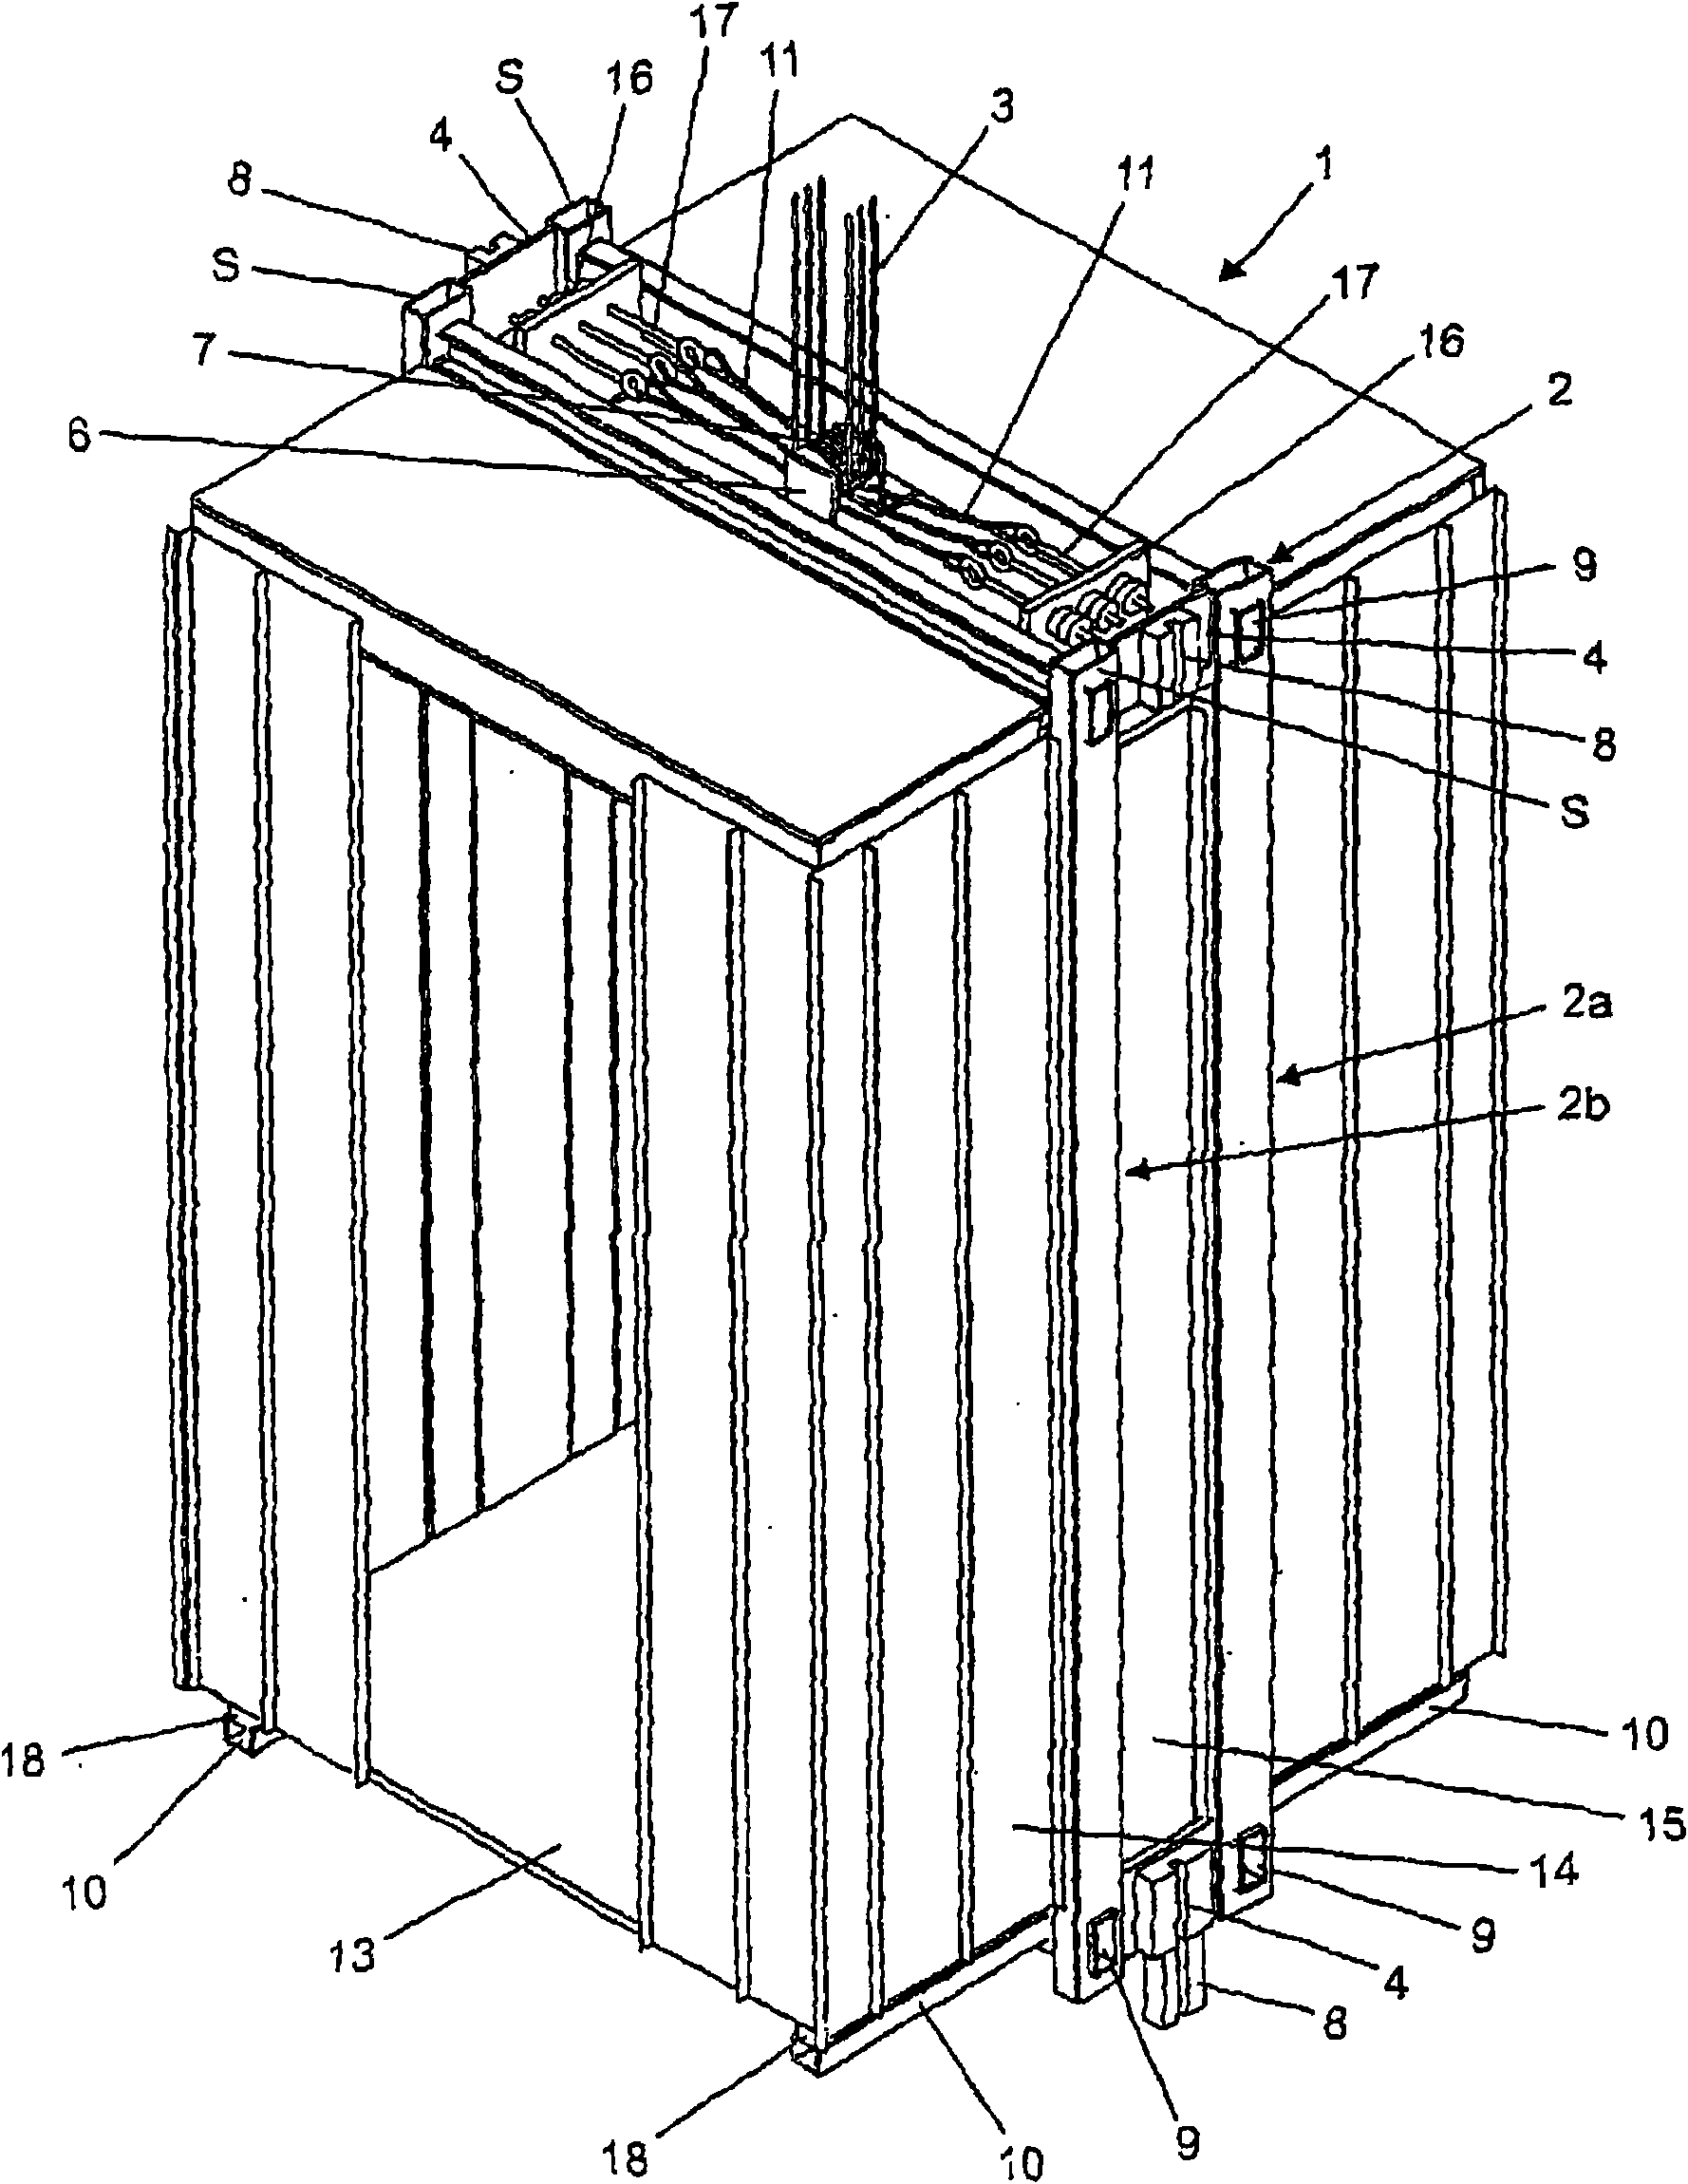 Self-supporting elevator car